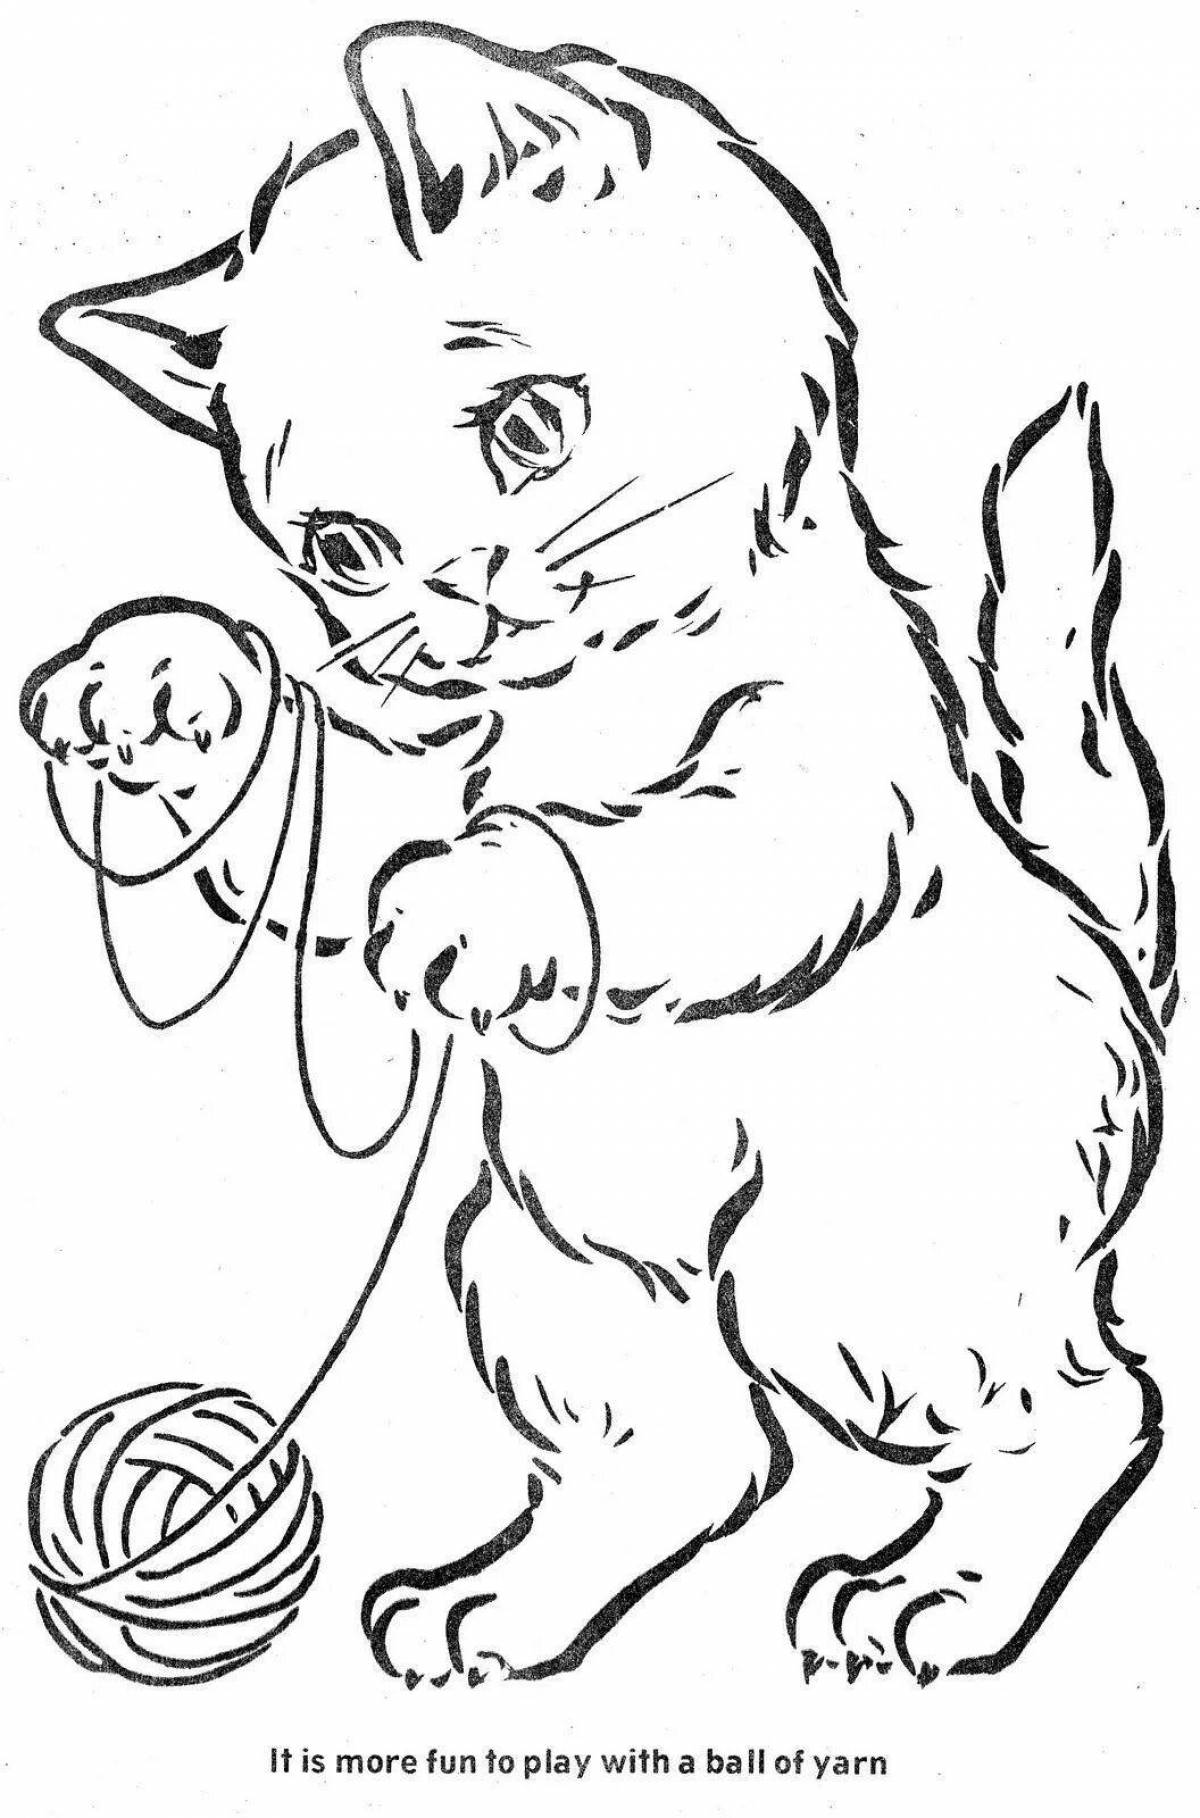 Coloring book smiling kitten with a ball